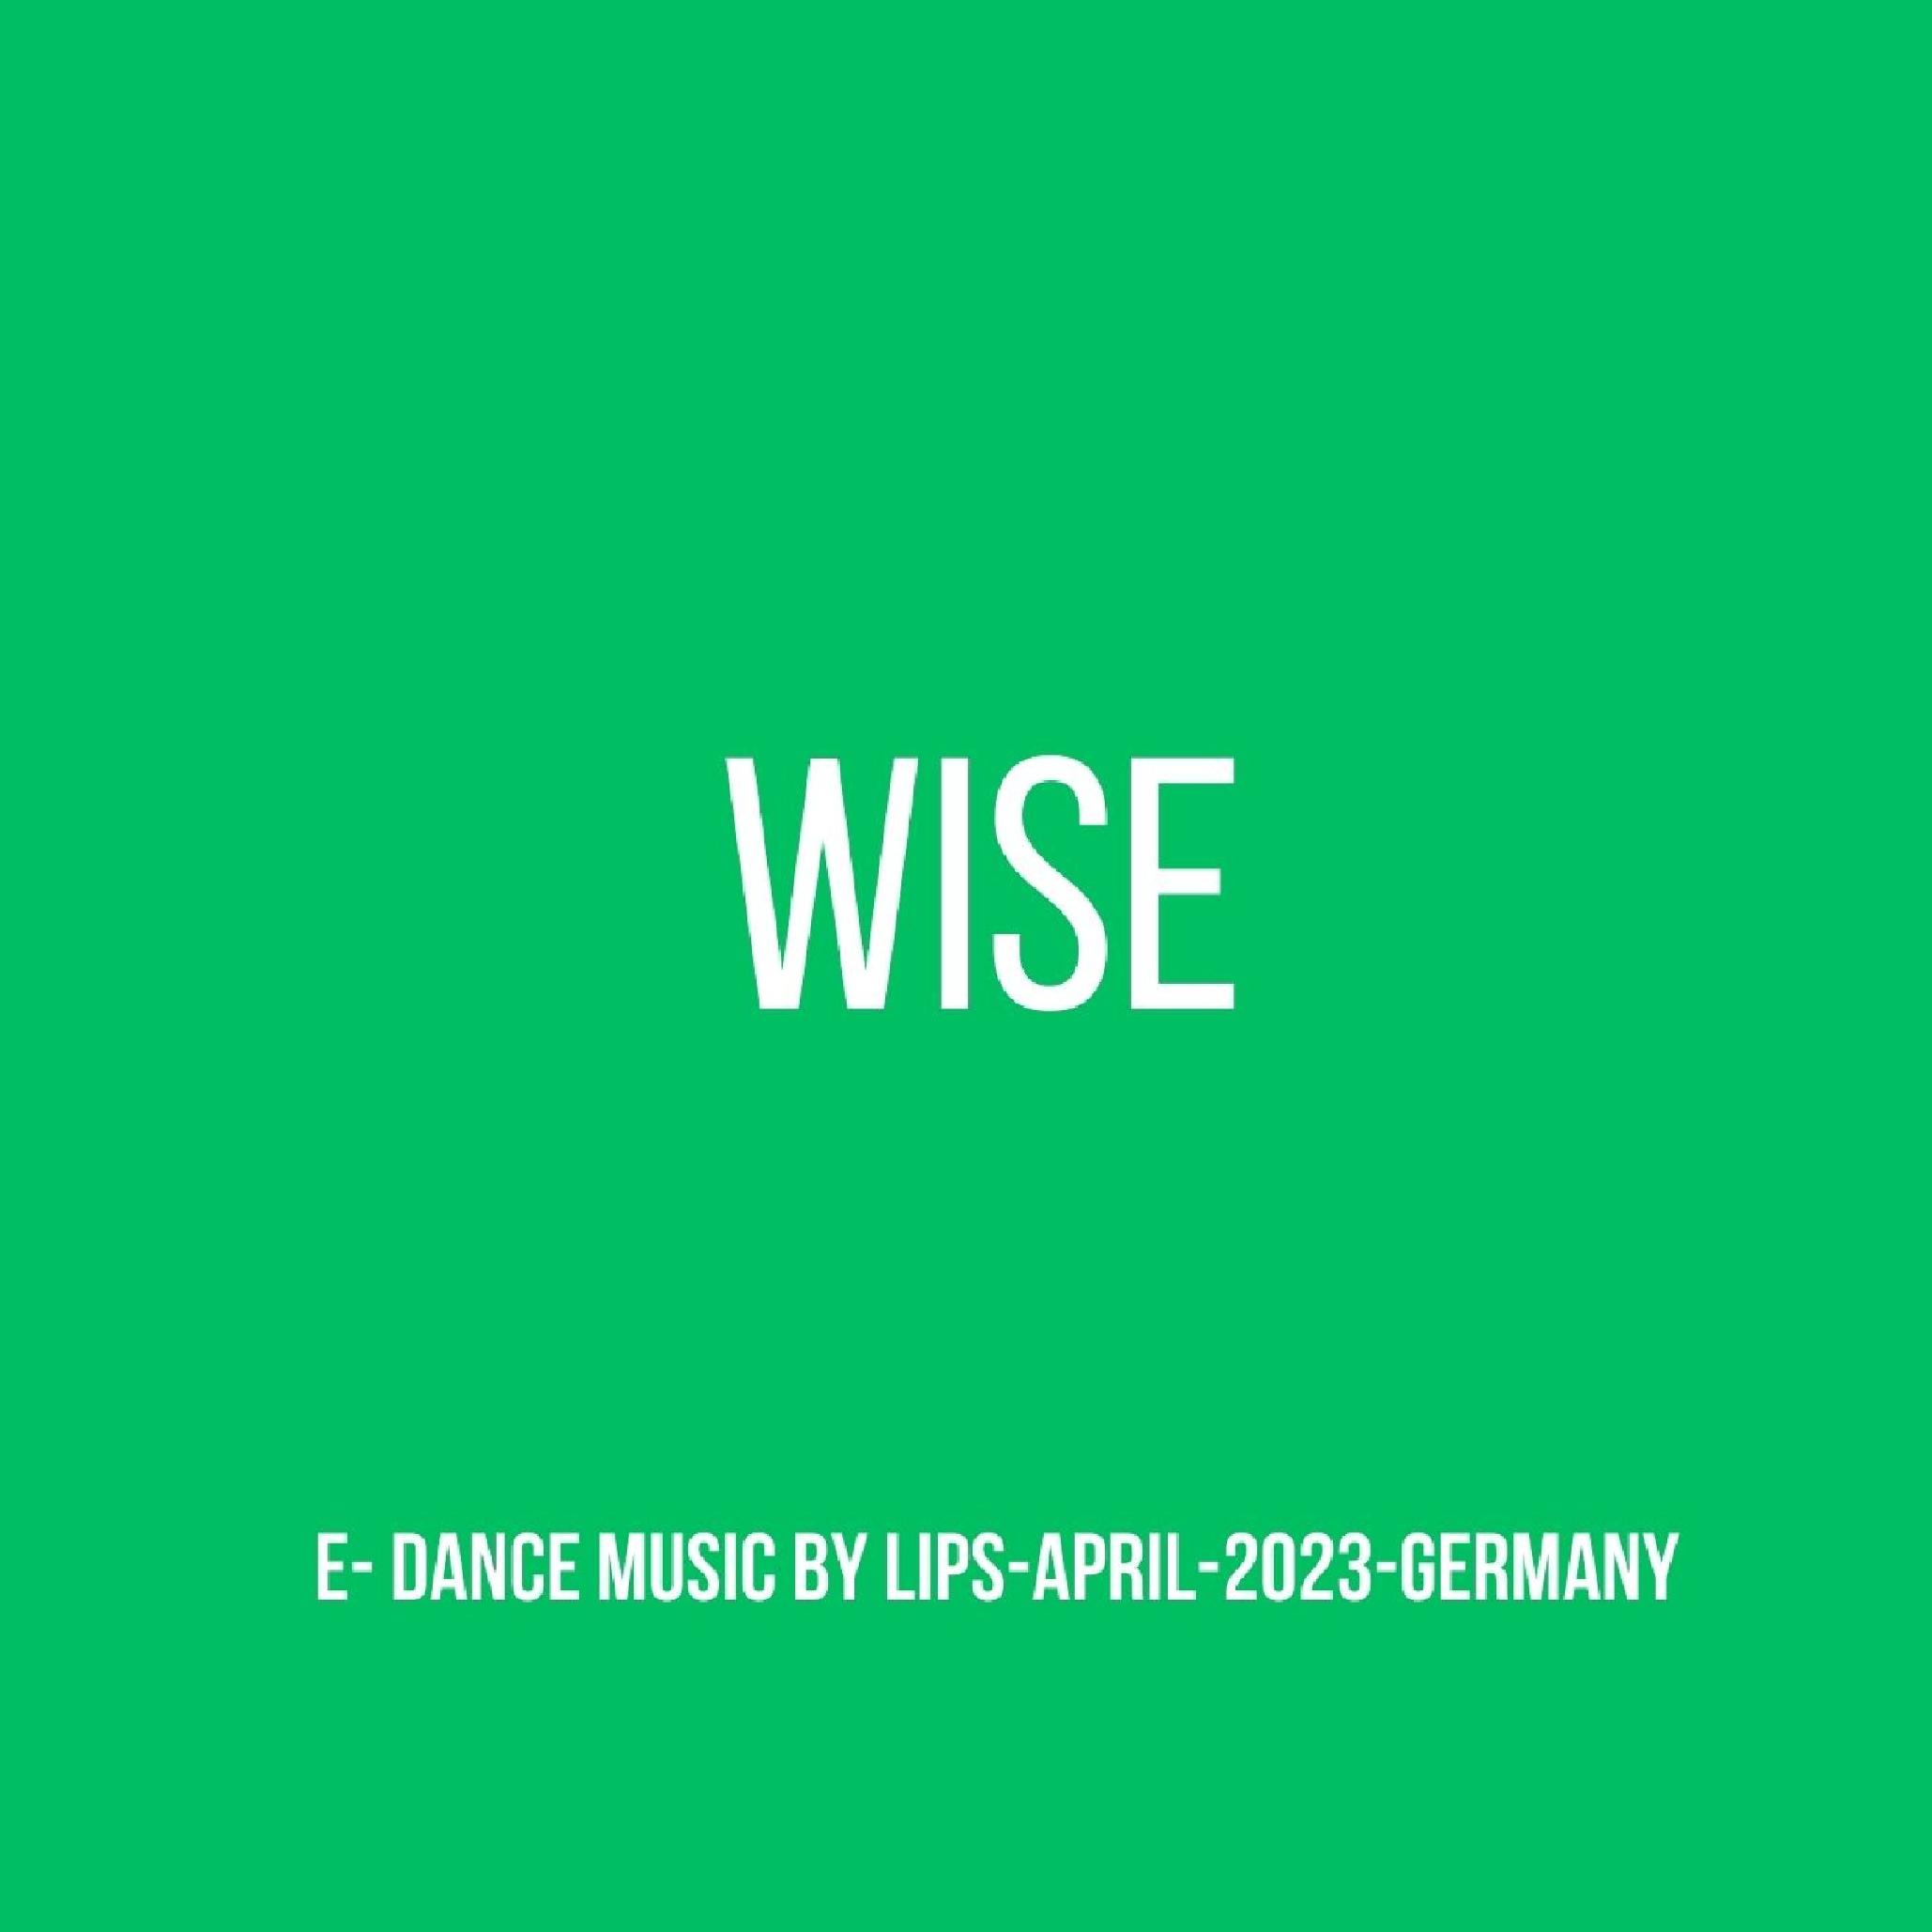 Wise+140+Trance-Dance+2_23+Fis-dur  by Lips